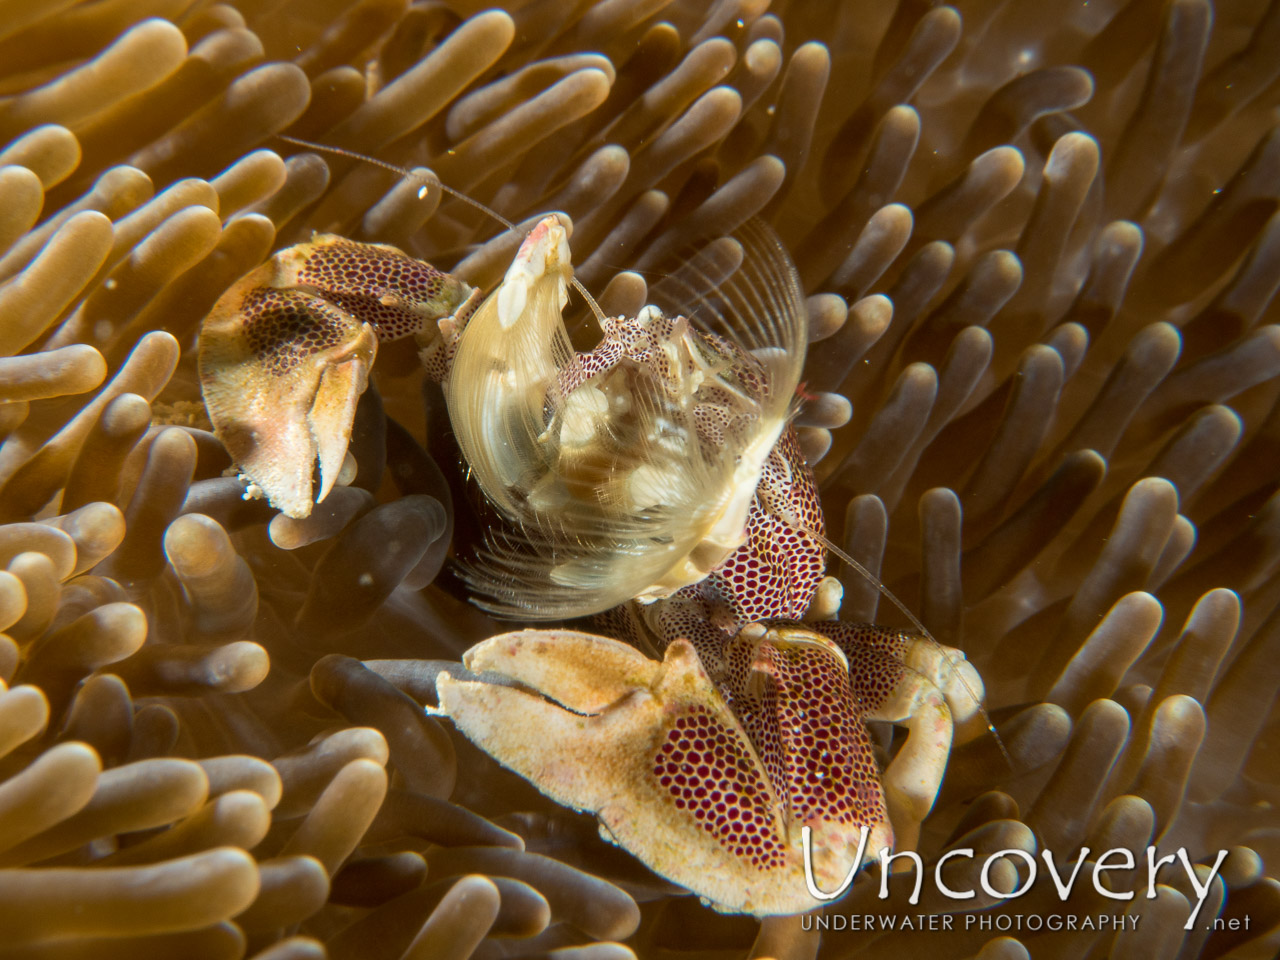 Spotted Porcelain Crab (neopetrolisthes Maculatus), photo taken in Maldives, Male Atoll, South Male Atoll, Cocoa Corner